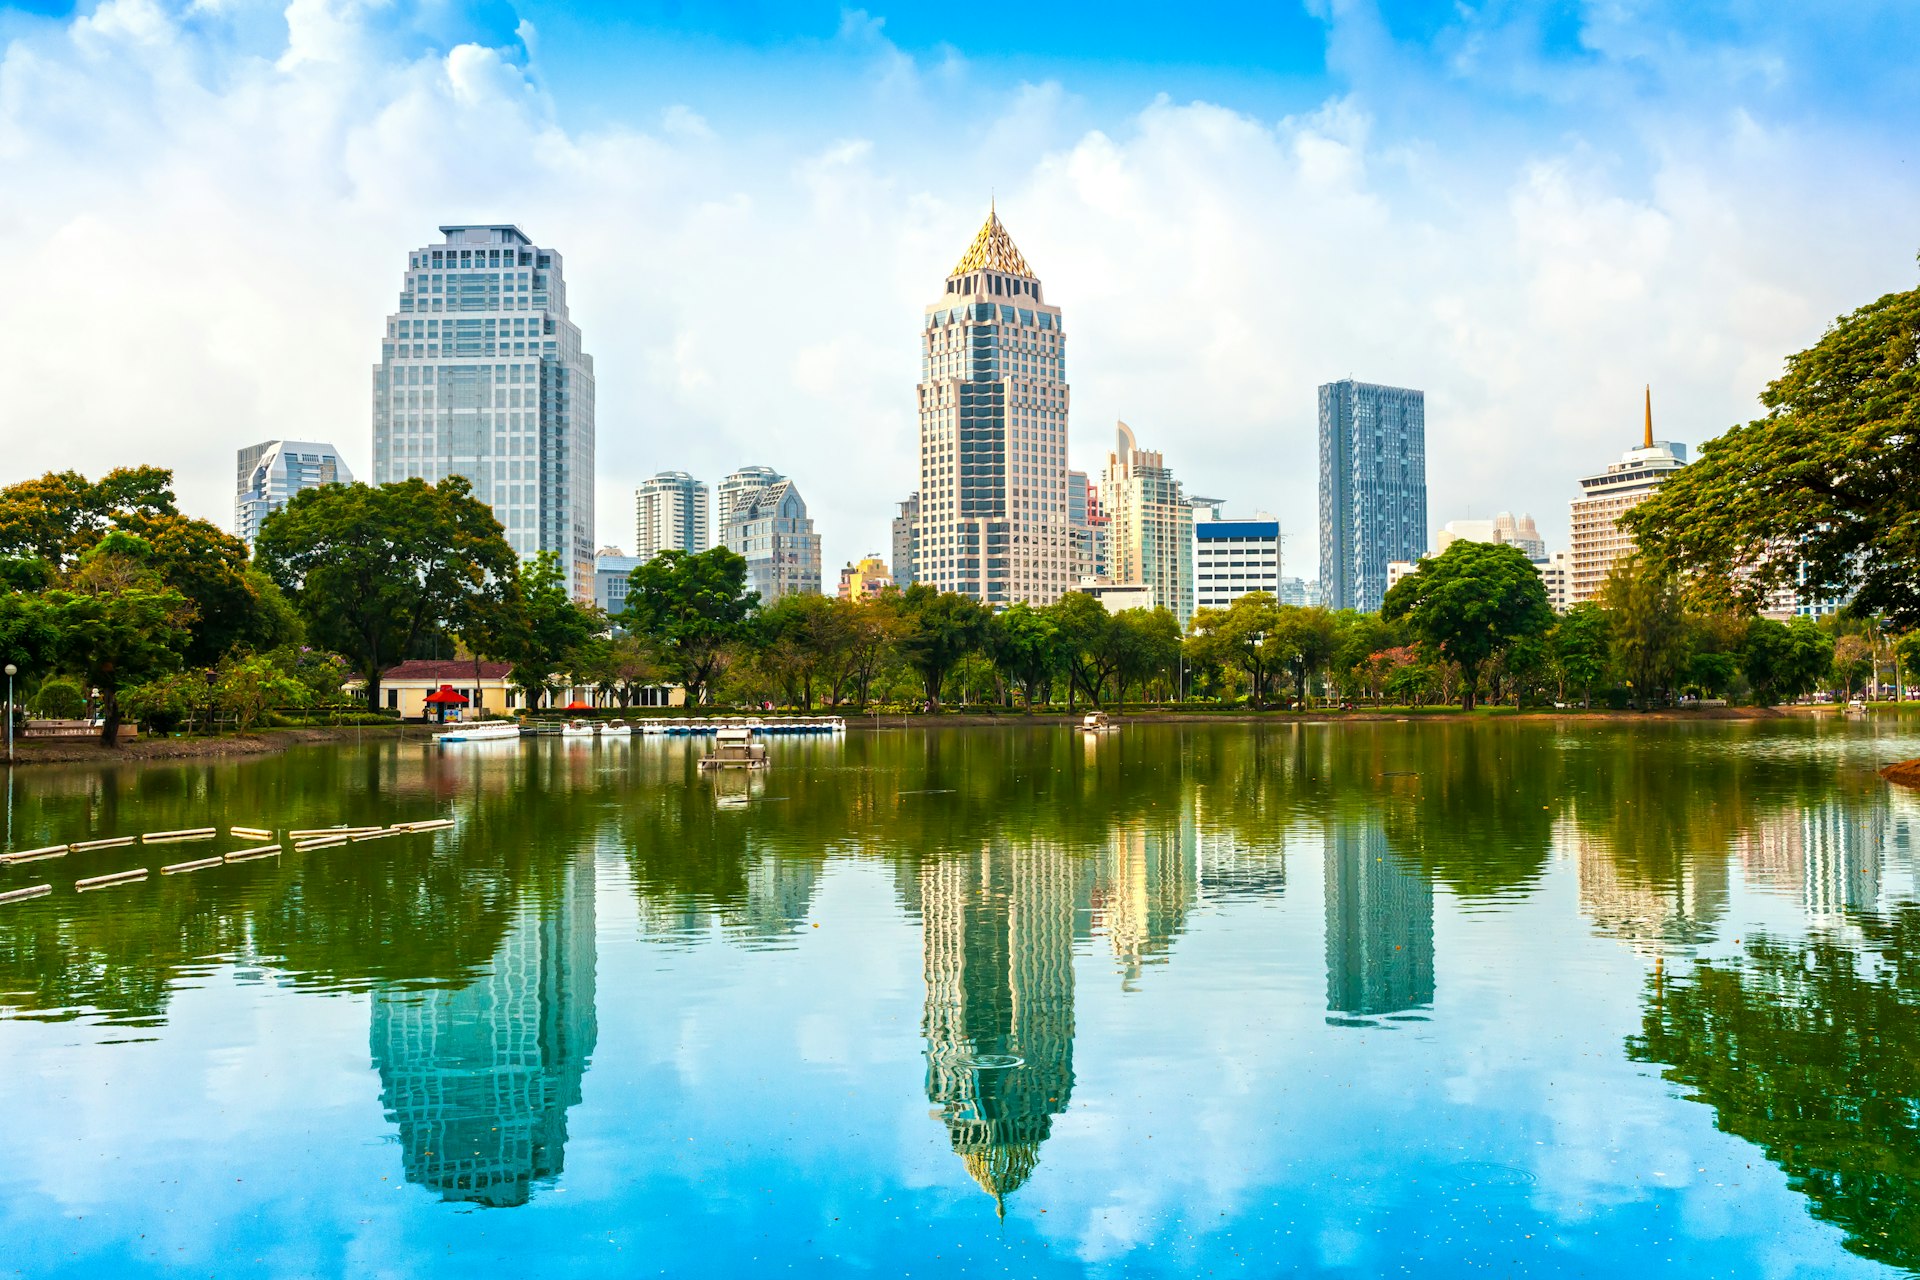 The tall skyscrapers of the Bangkok skyline sit in front of a bright blue sky across the glittering, quiet and empty lake that belongs to Lumphini Park